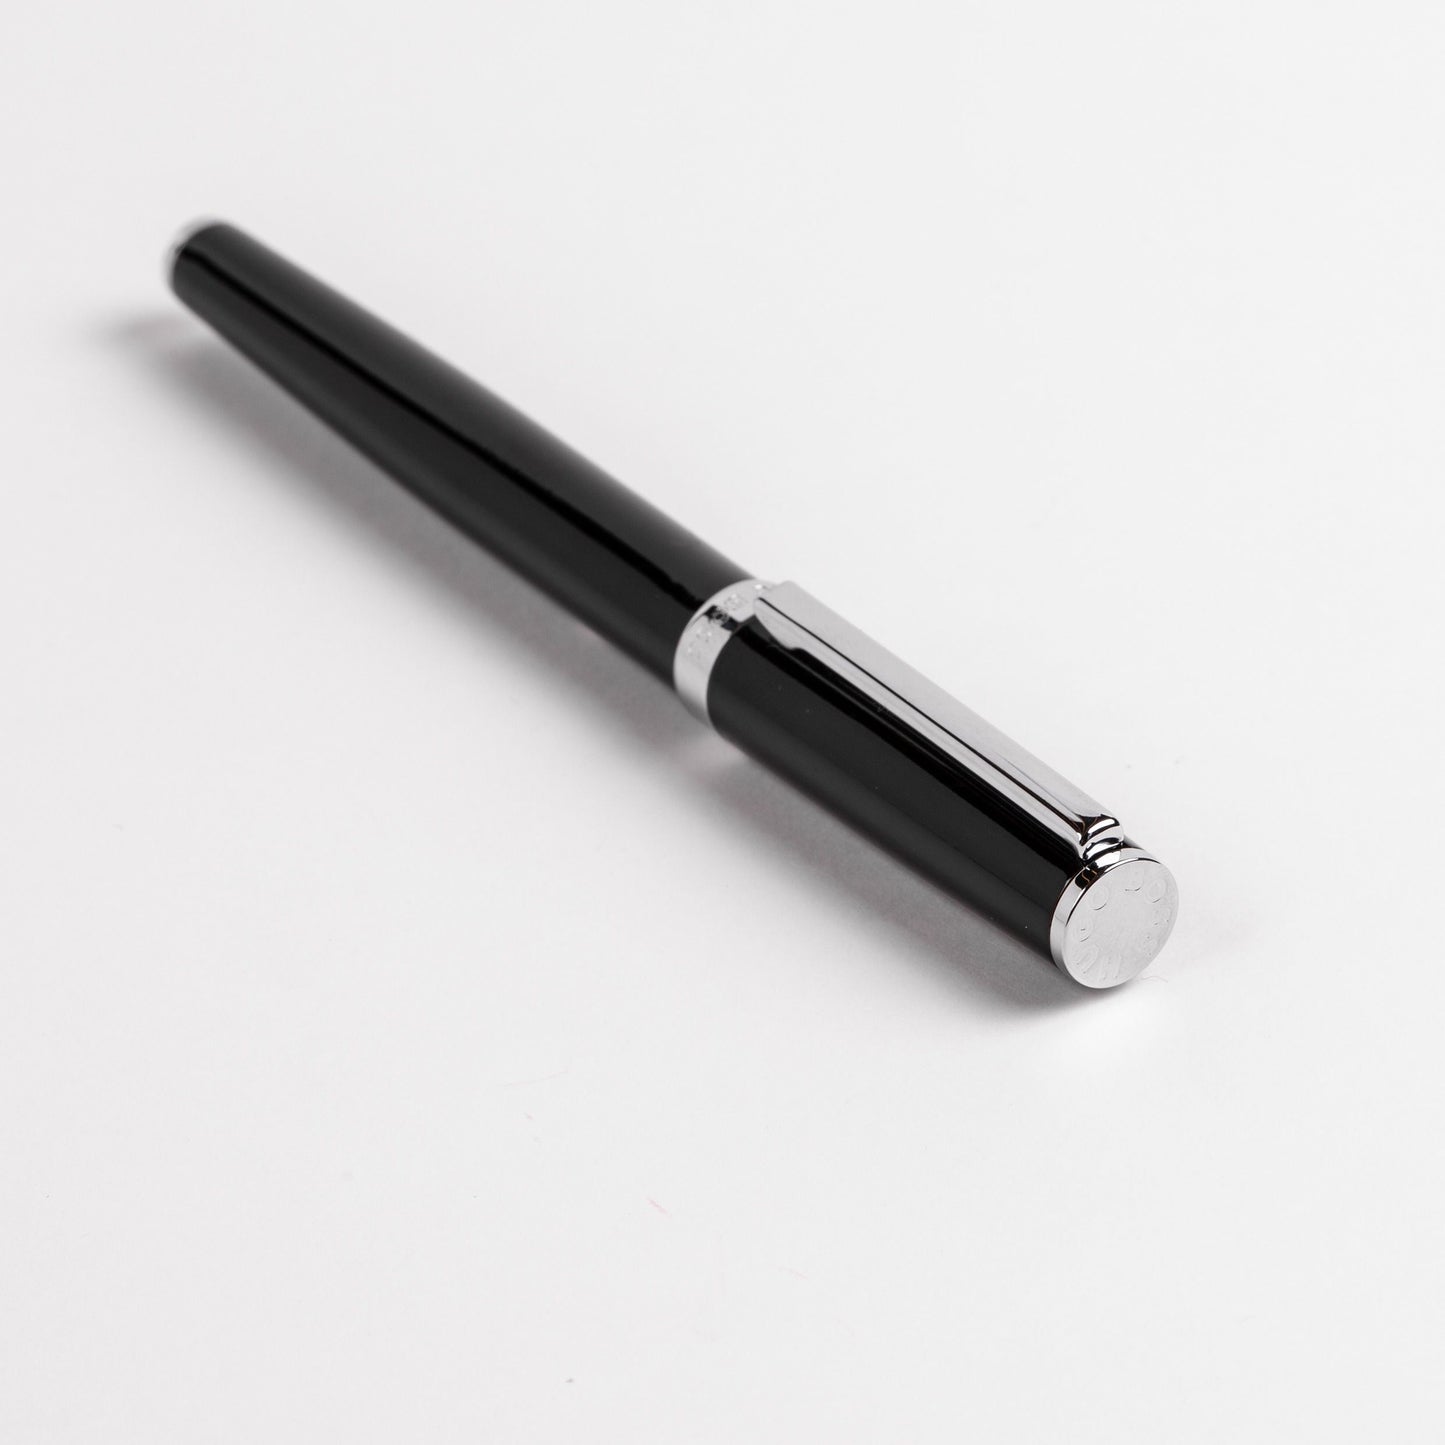 Hugo Boss - Rollerball Pen Gear Icon Black - Product Code: HSN2545A